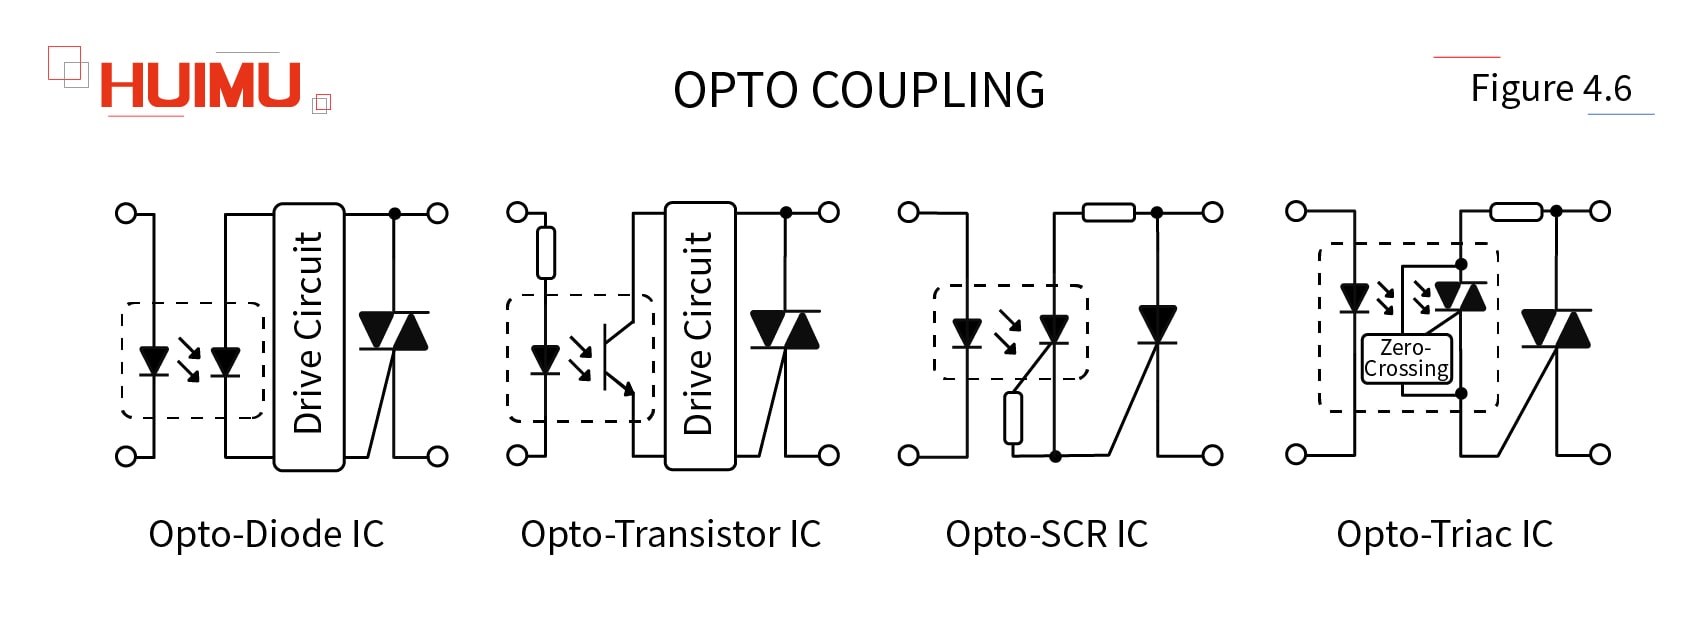 According to the different components , the opto-coupler can be into Opto-Diode Coupler(Photo-Diode Coupler), Opto-Transistor Coupler (Photo-Transistor Coupler), Opto-SCR Coupler (Photo-SCR Coupler), and Opto-Triac Coupler (Photo-Triac Coupler). 